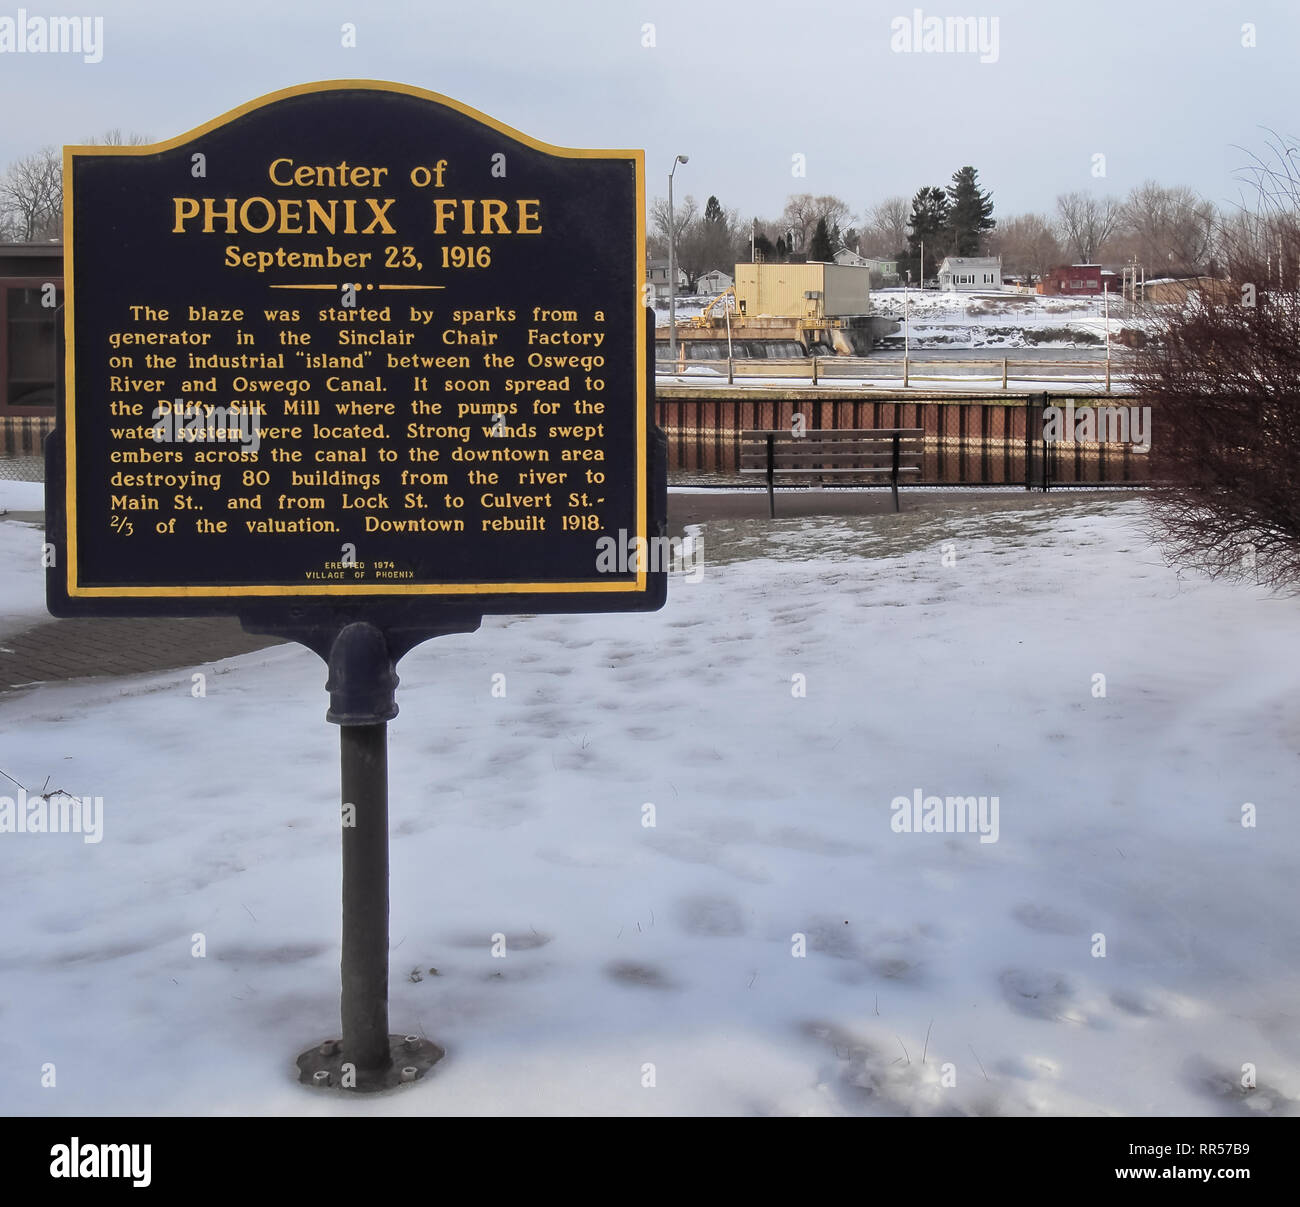 Phoenix, New York, USA. February 23, 2019. Memorial plaque in the small town center of Phoenix, New York, on the Oswego River, commemorating a disaste Stock Photo